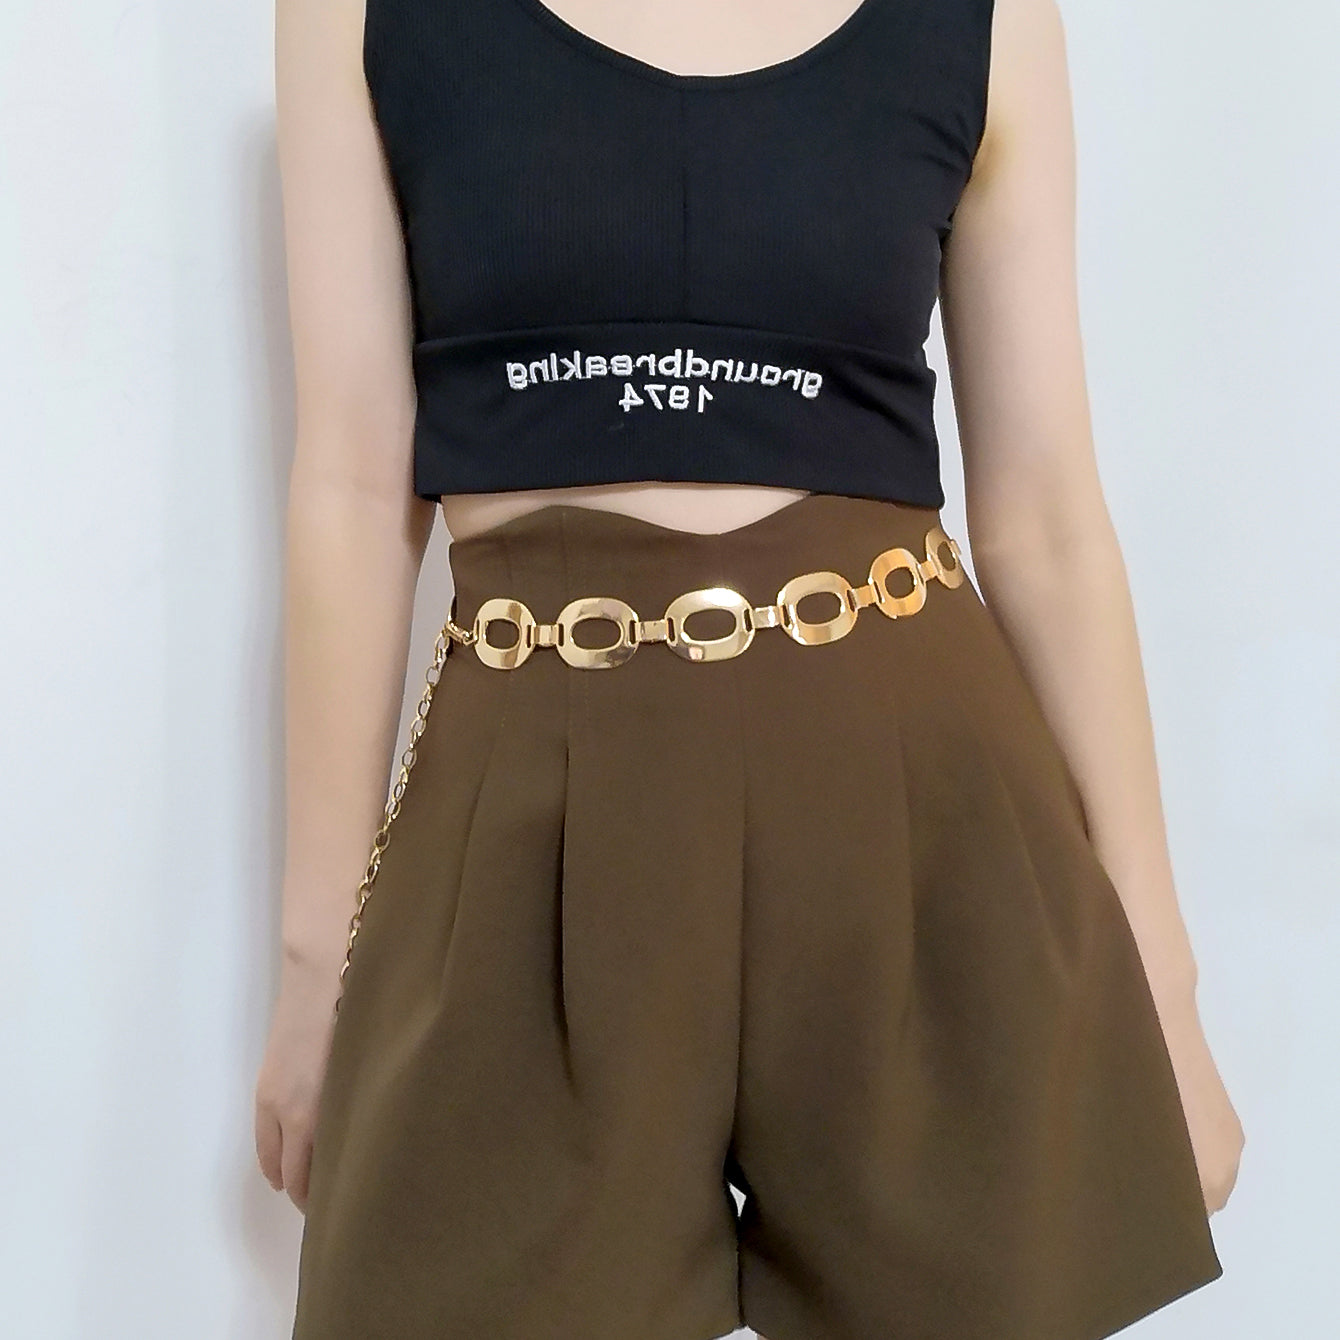 A woman wearing a black top and shorts with a Maramalive™ Popular and Trendy Summer Jewelry Waist, Navel Chain Metal Jewelry.